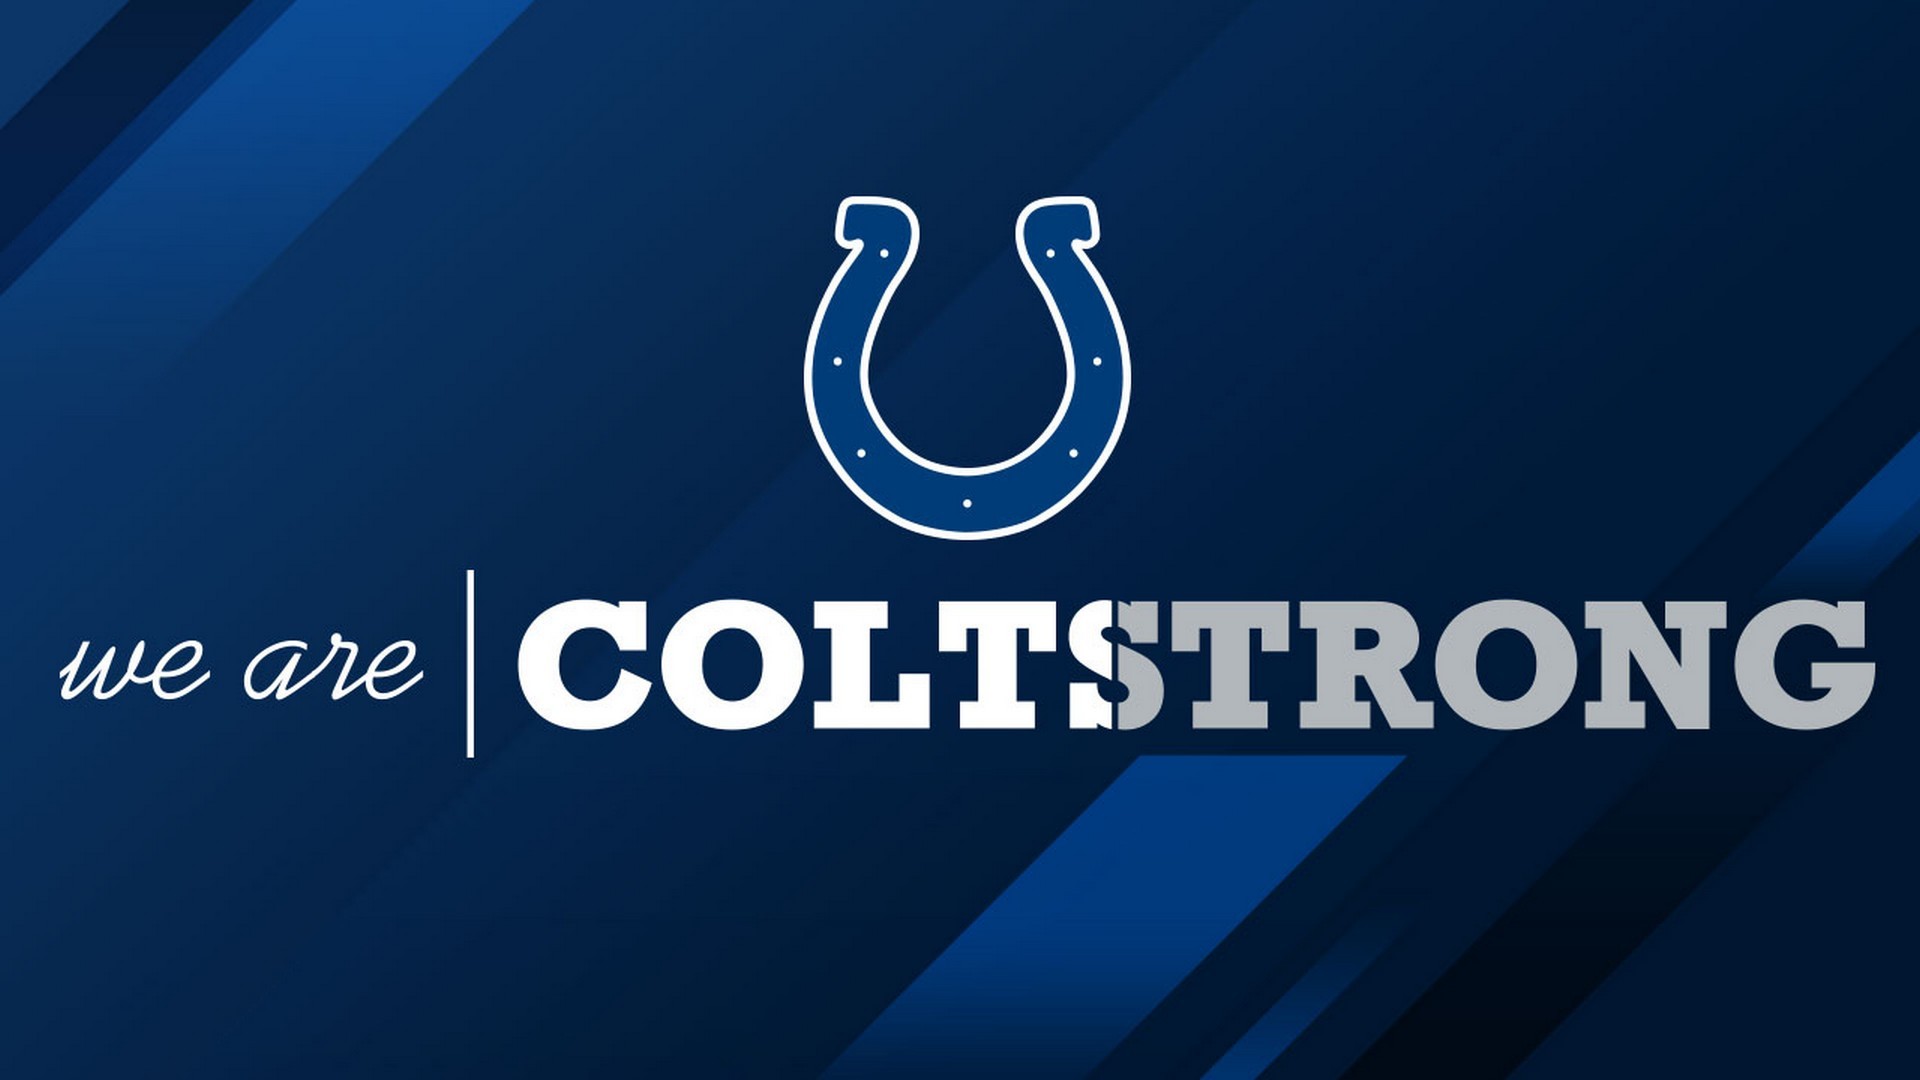 Indianapolis Colts Wallpaper in HD with high-resolution 1920x1080 pixel. Download and set as wallpaper for Desktop Computer, Apple iPhone X, XS Max, XR, 8, 7, 6, SE, iPad, Android